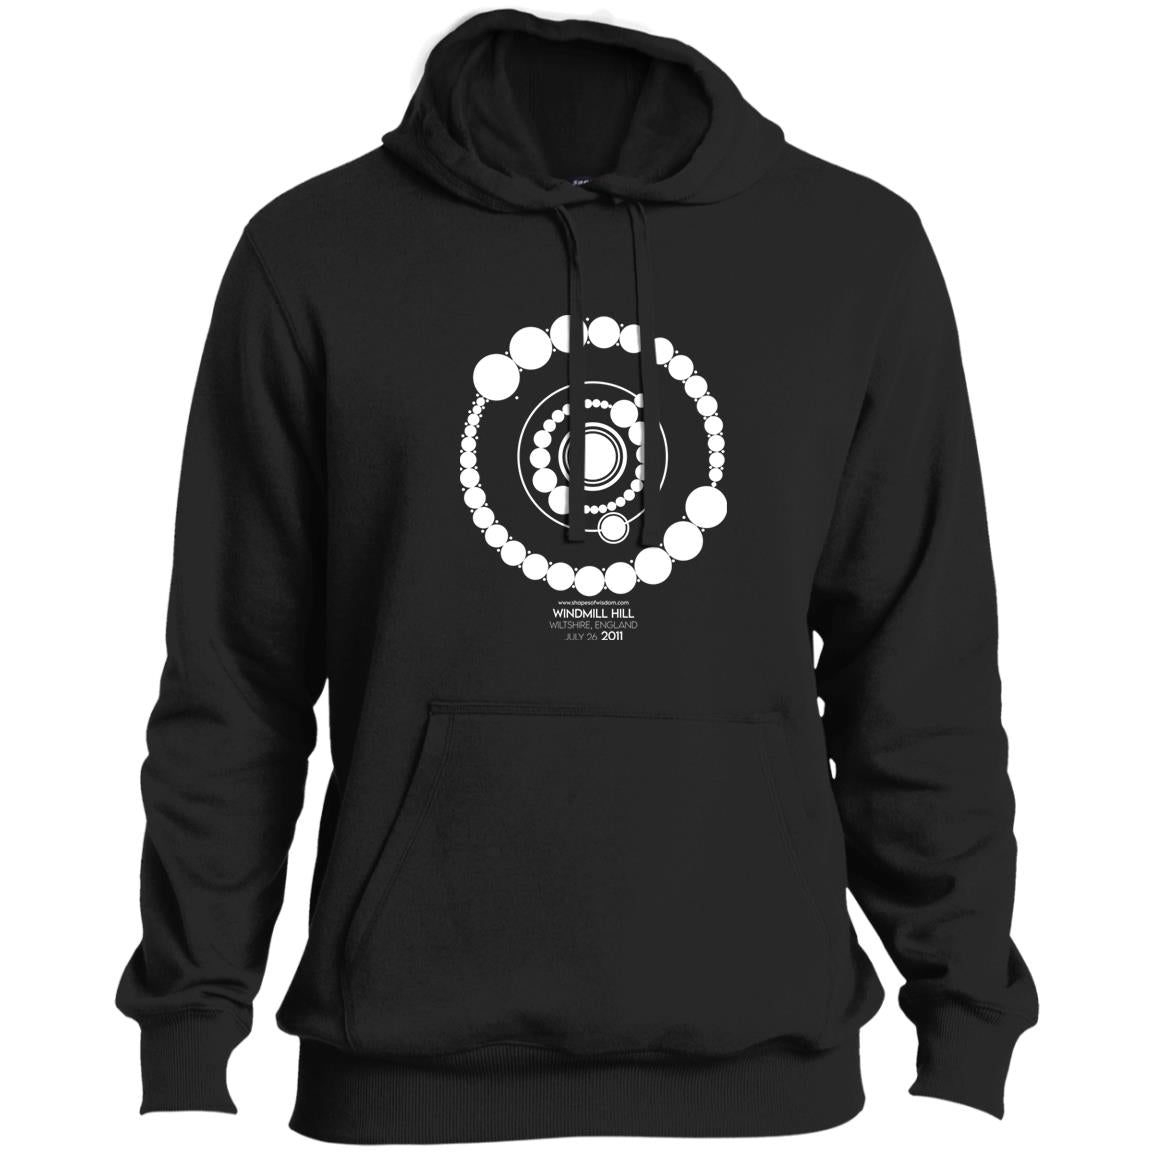 Crop Circle Pullover Hoodie - Windmill Hill 12